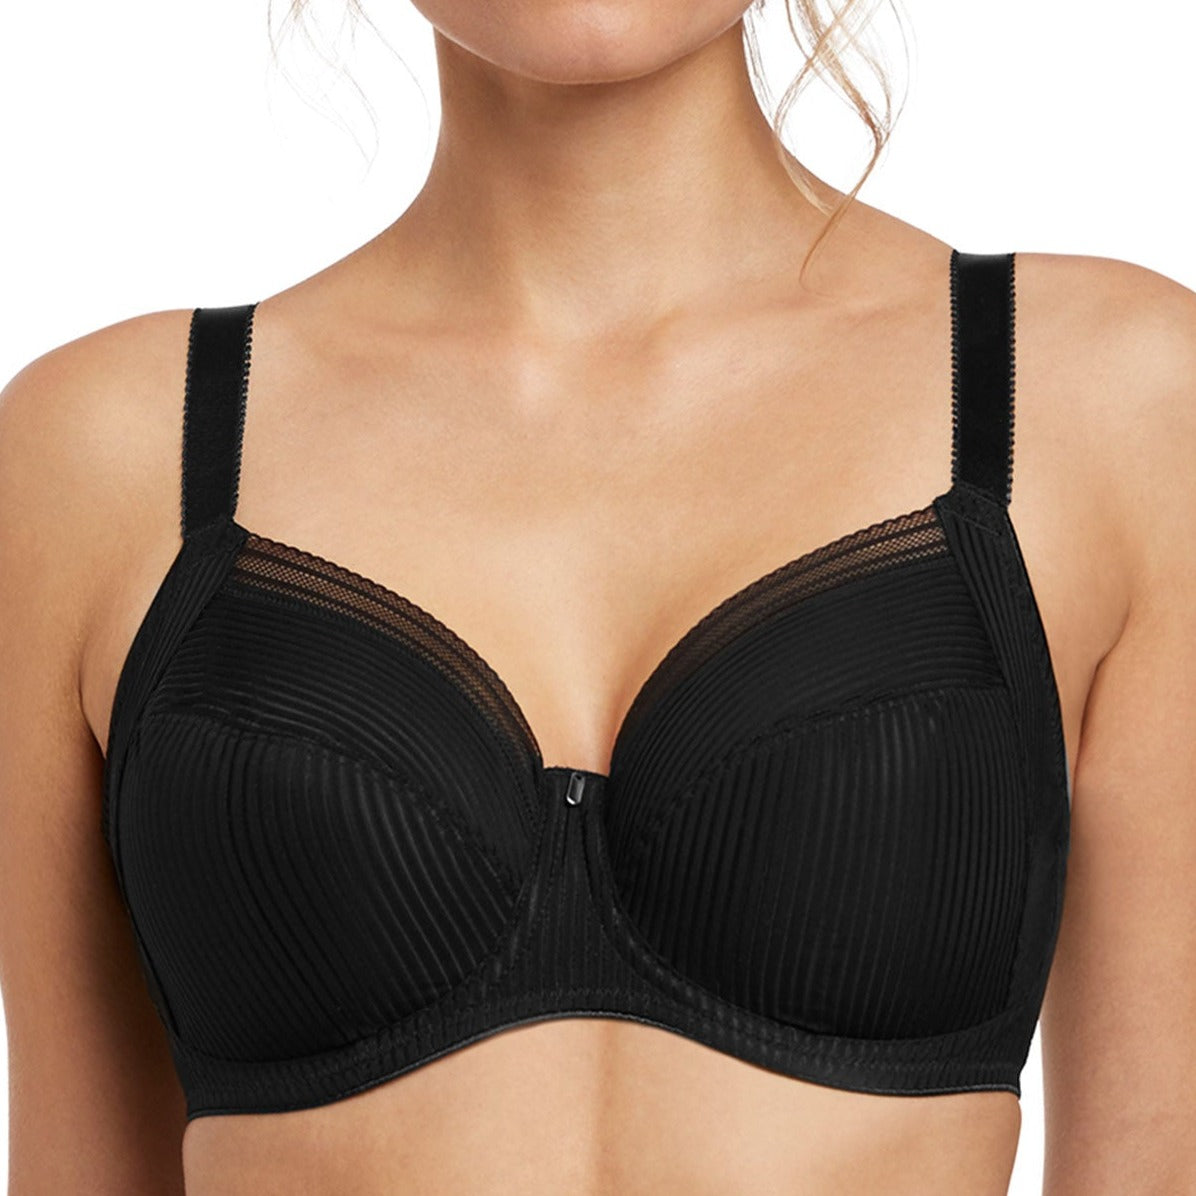 Fusion Full Cup Side Support - FL3091 - Black